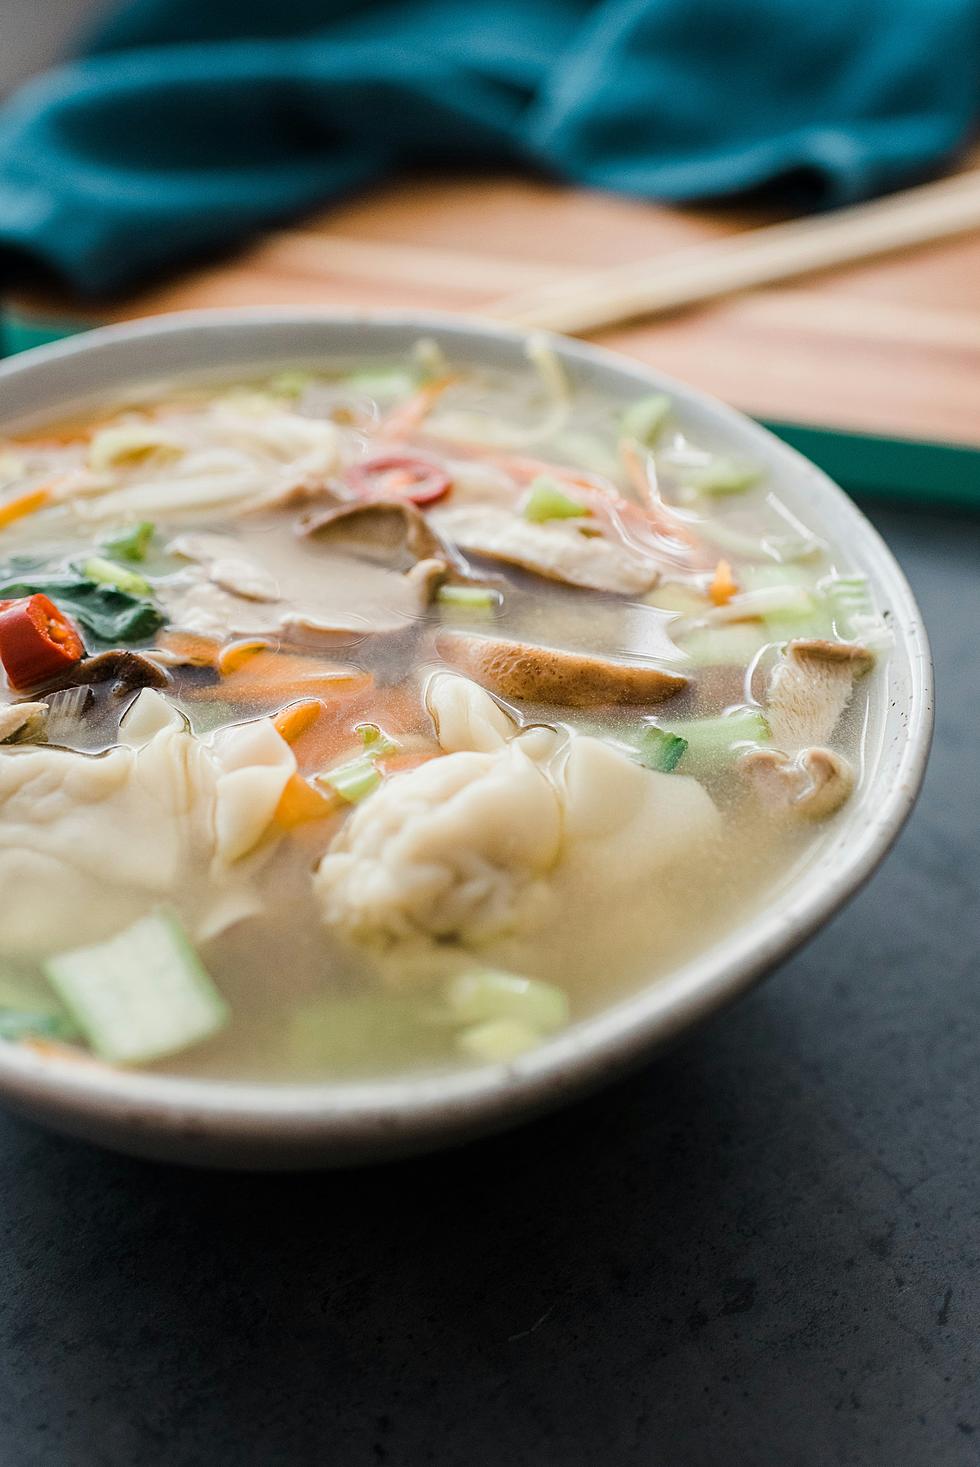 It's a Taste of Heaven! Where To Find The Best Soup In New Jersey